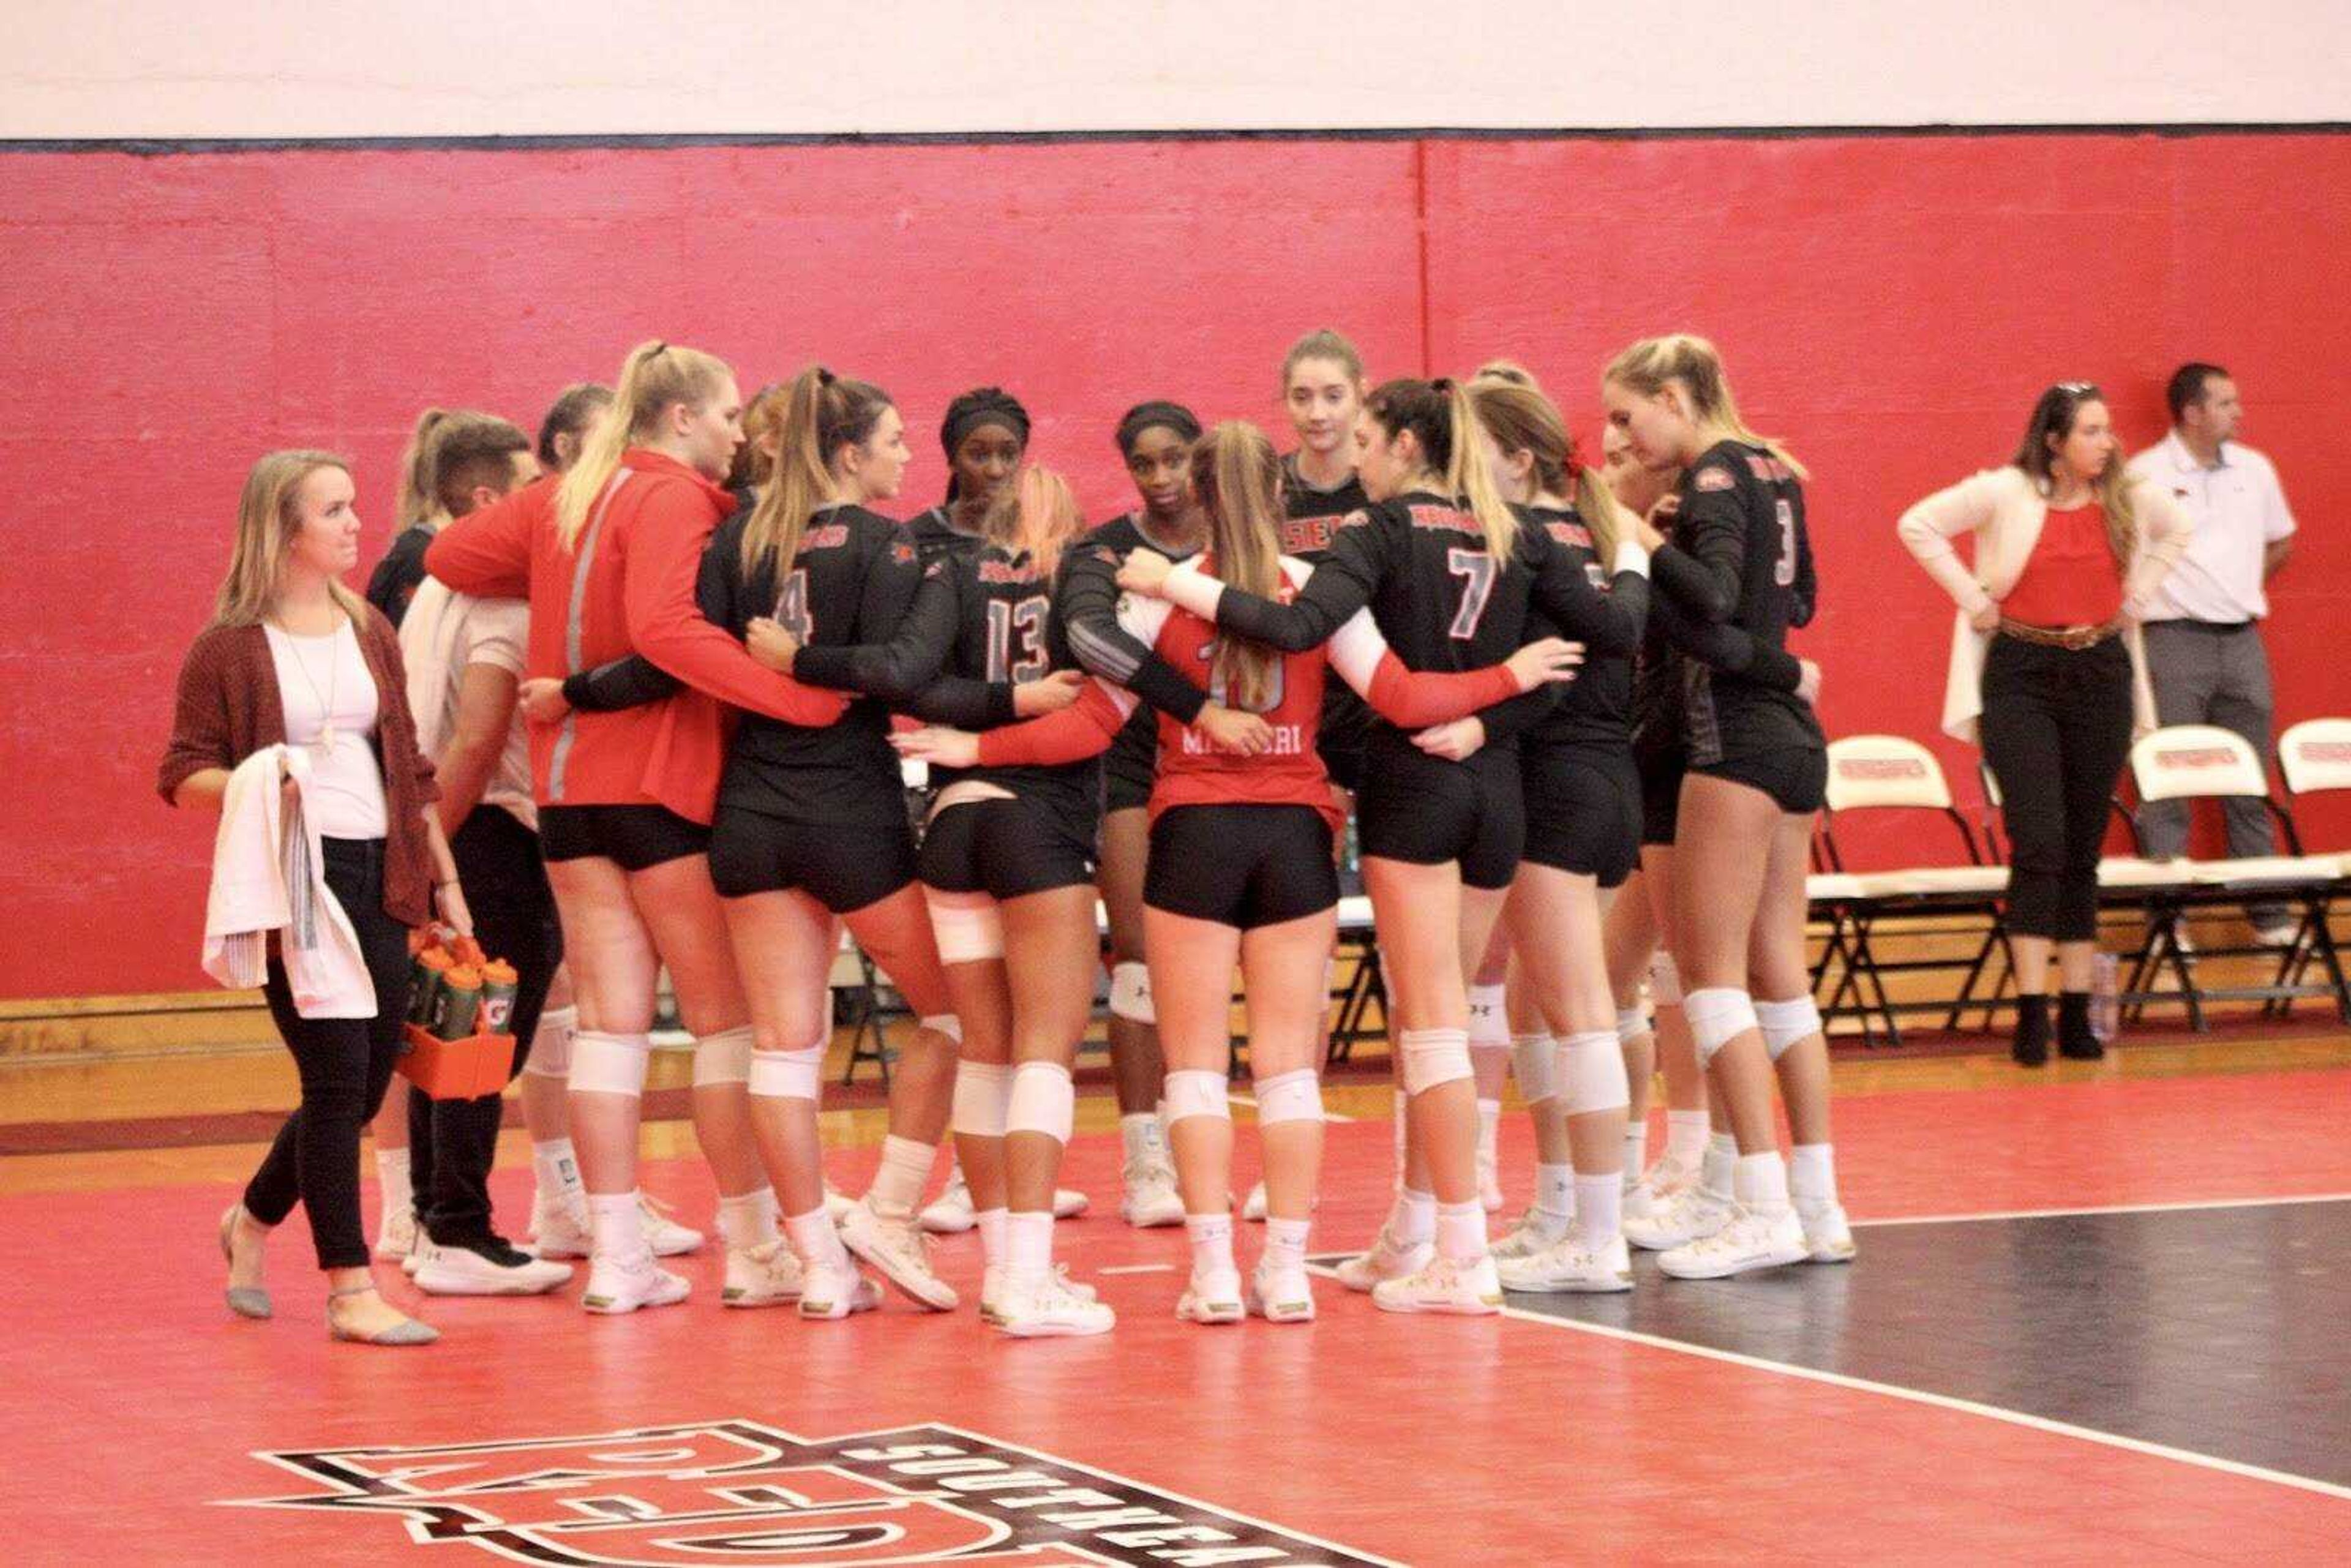 The 2019-20 team huddles between sets during a four-set win over Jacksonville State on Nov. 2, 2019, at Houck Field House in Cape Girardeau, Mo.